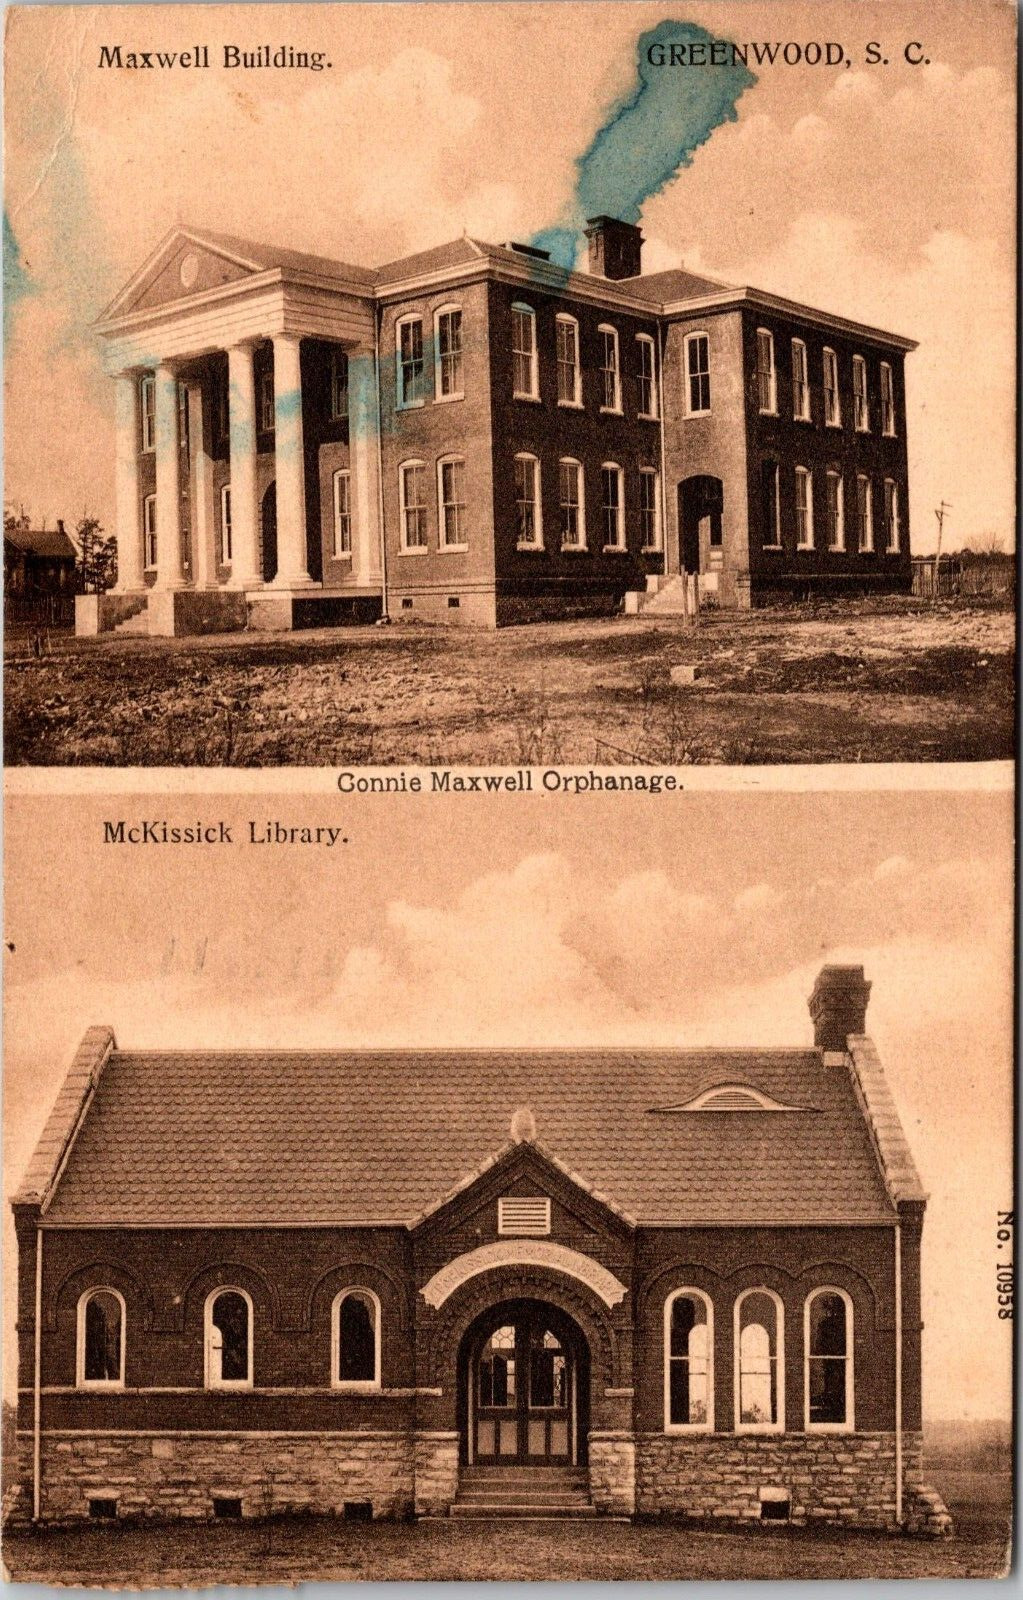 Connie Maxwell Orphanage Greenwood SC Maxwell Building 1909 McKissick Library